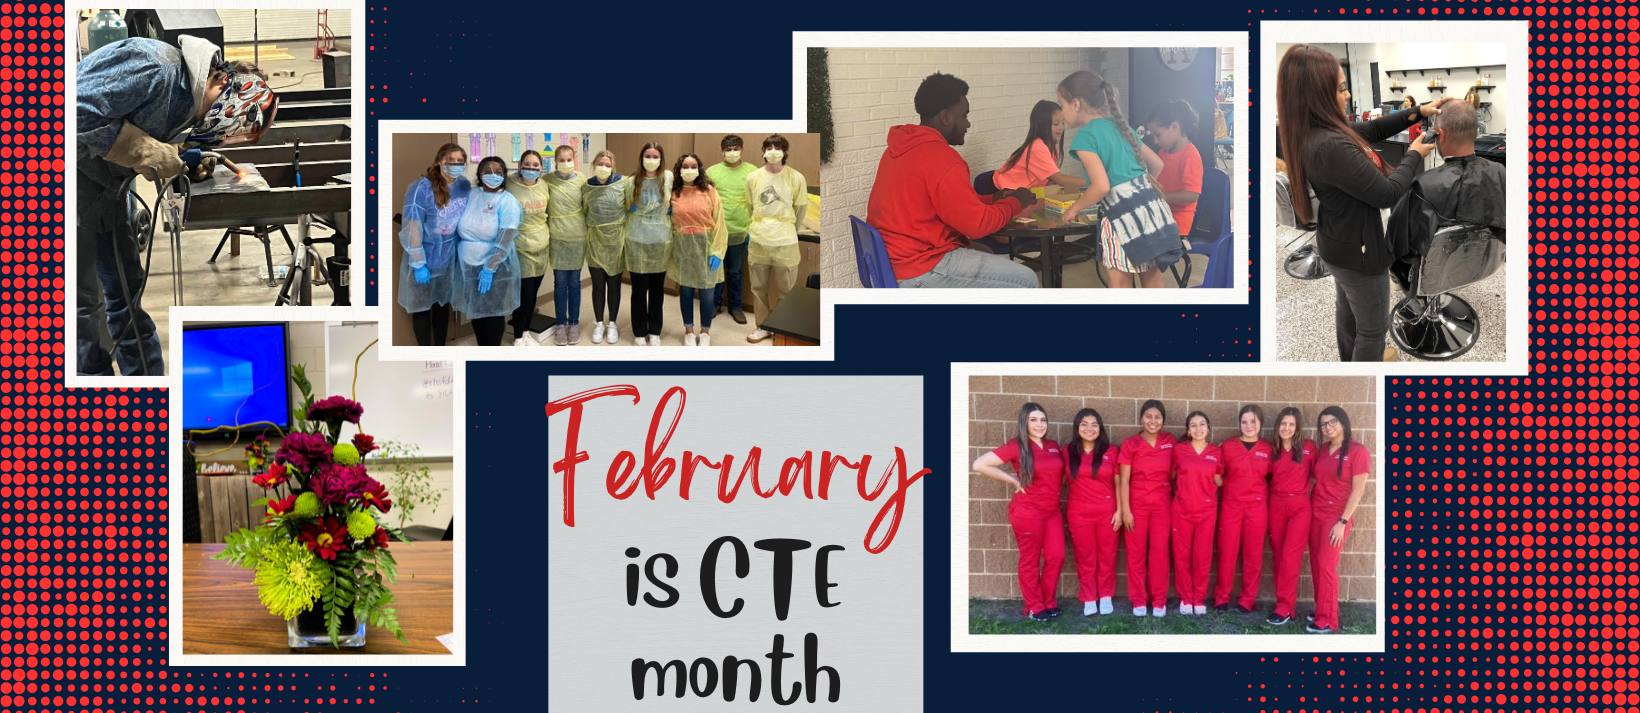 CTE students.  February is CTE month